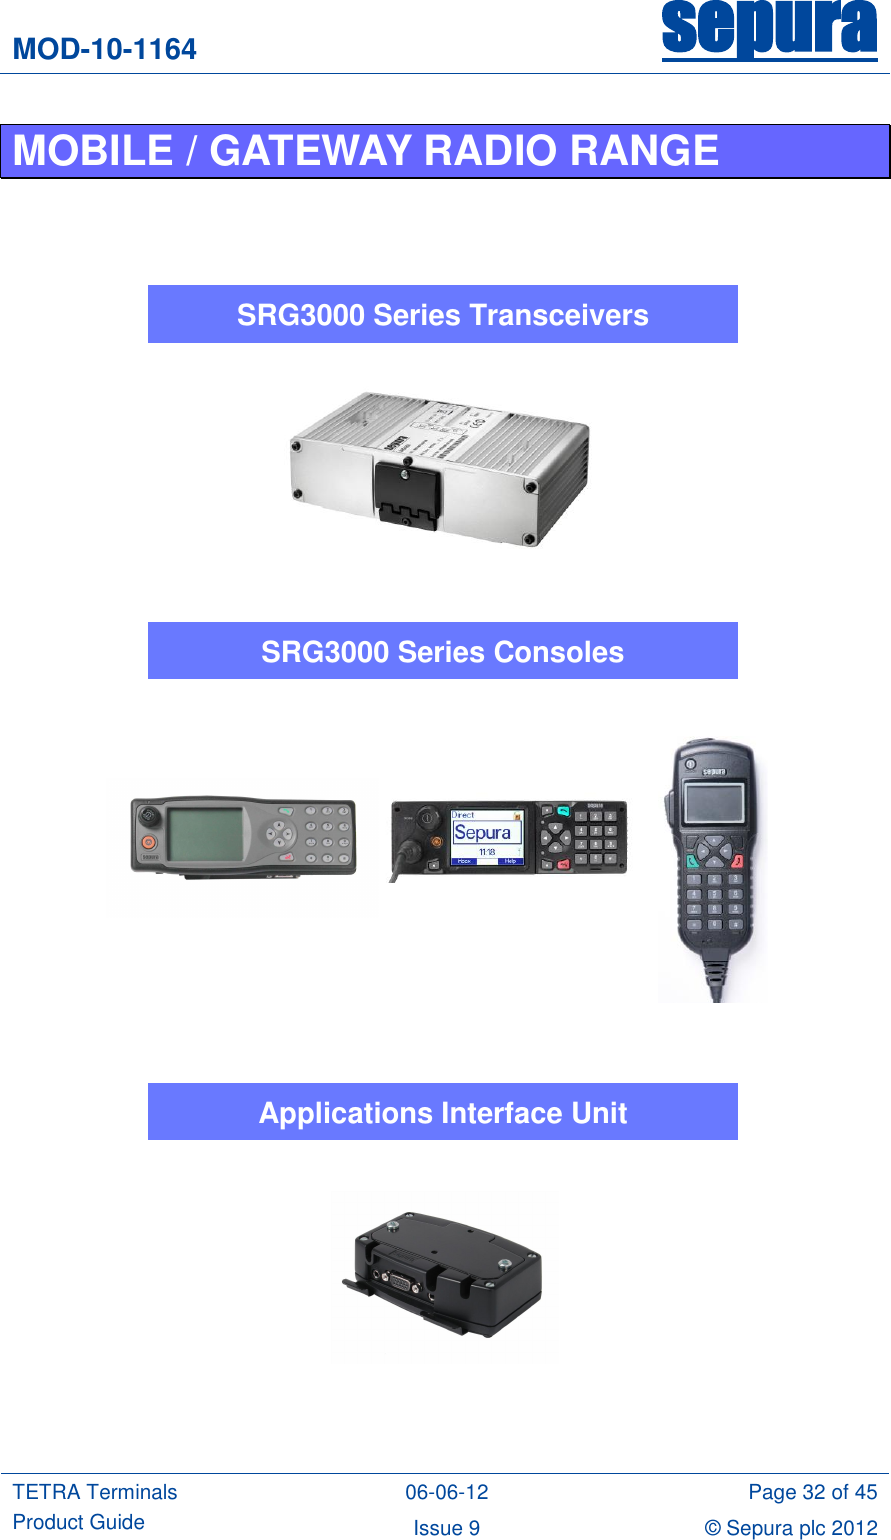 MOD-10-1164 sepura  TETRA Terminals Product Guide 06-06-12 Page 32 of 45 Issue 9 © Sepura plc 2012   MOBILE / GATEWAY RADIO RANGE                                 SRG3000 Series Transceivers Applications Interface Unit SRG3000 Series Consoles 